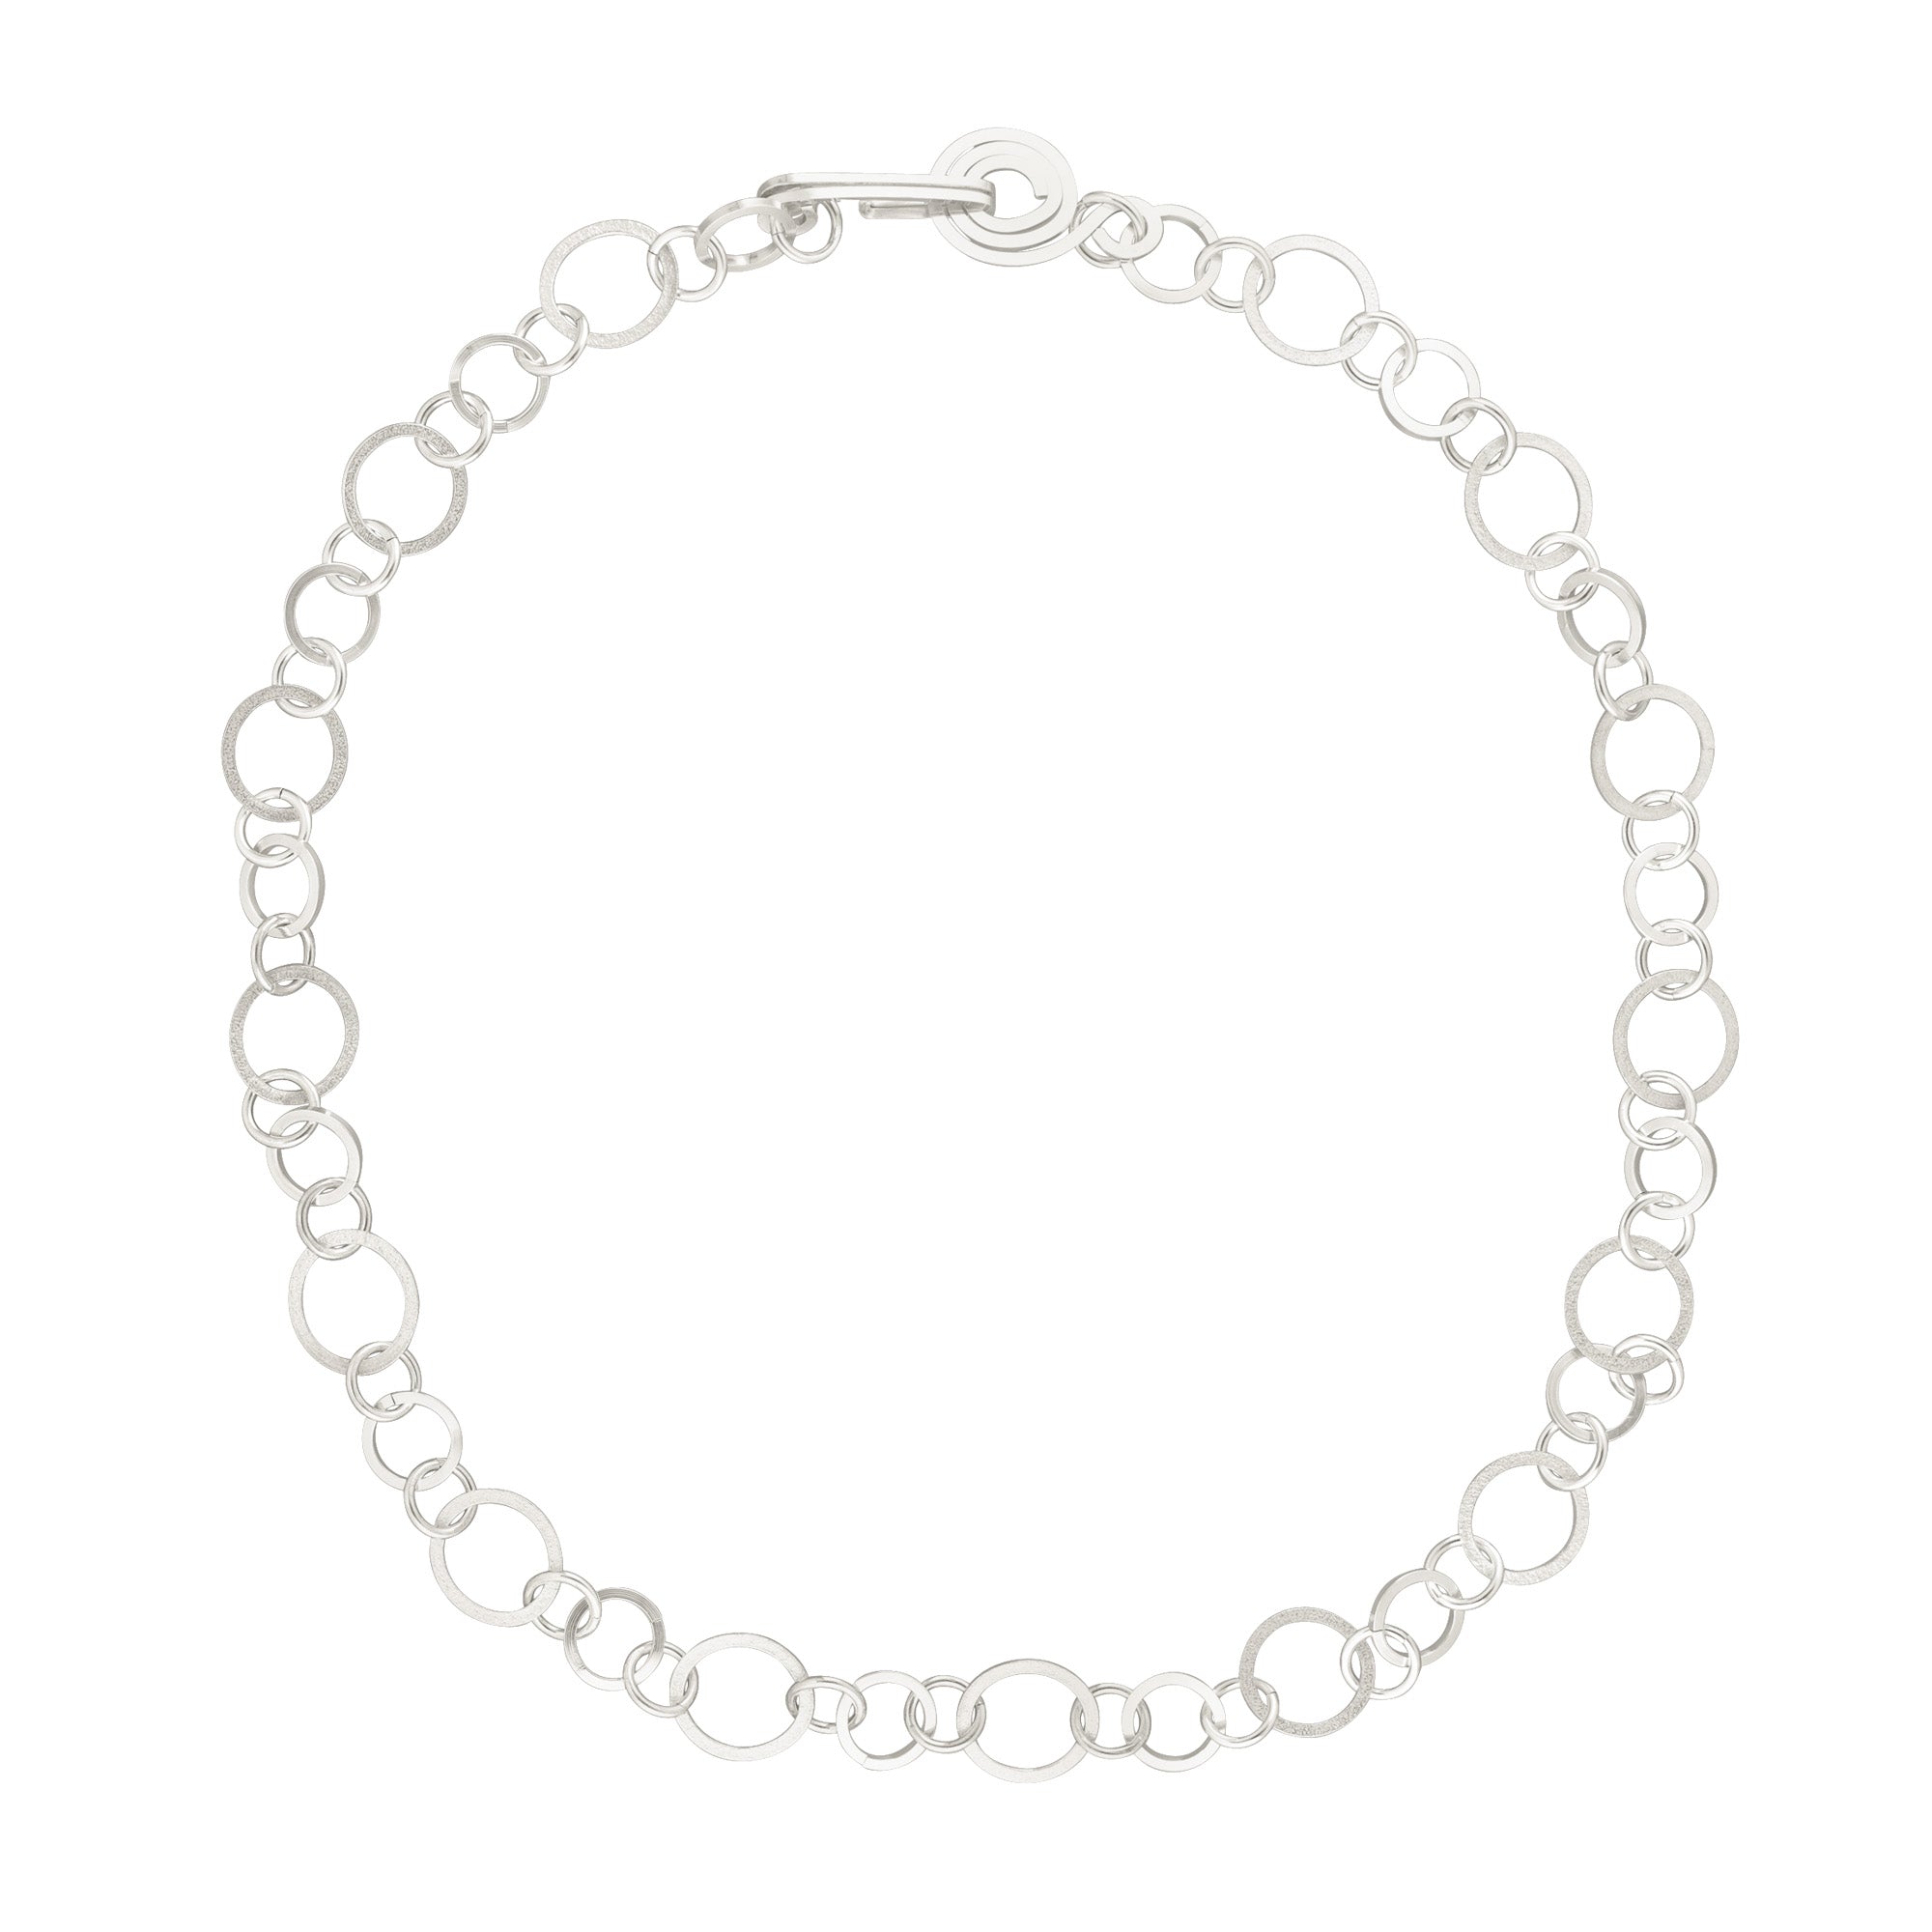 Handcrafted Open Link Chain Necklace in Argentium Sterling Silver